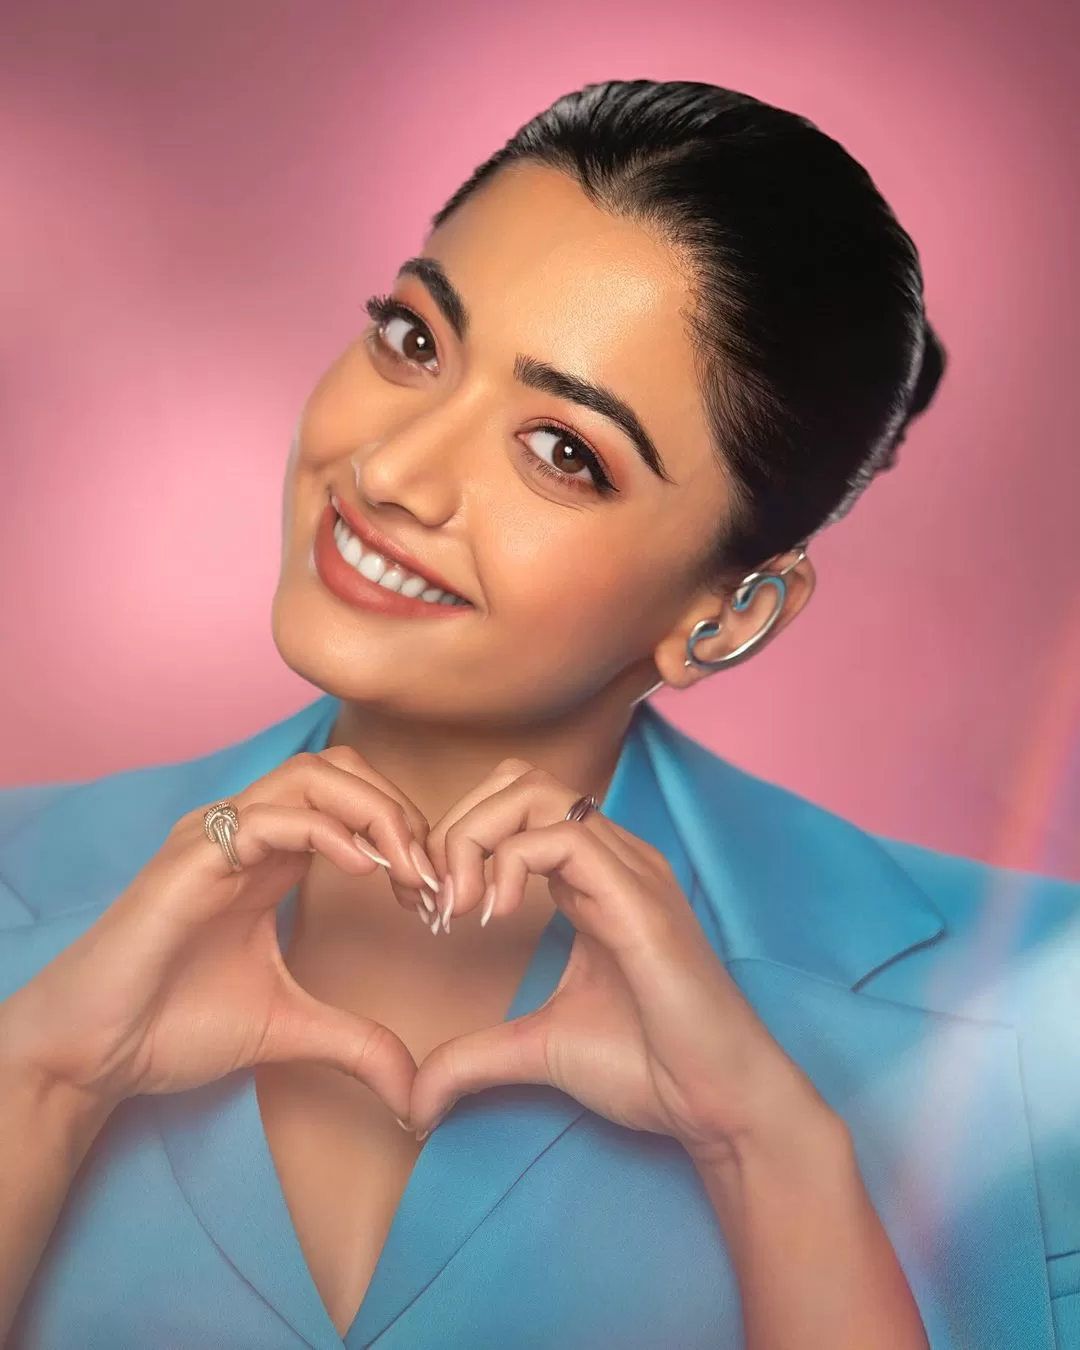 Rashmika Mandanna Shares Valentine's Day Plans In A Chit-Chat Session 'And Tell Me Your Valentine’s Day Plans...'